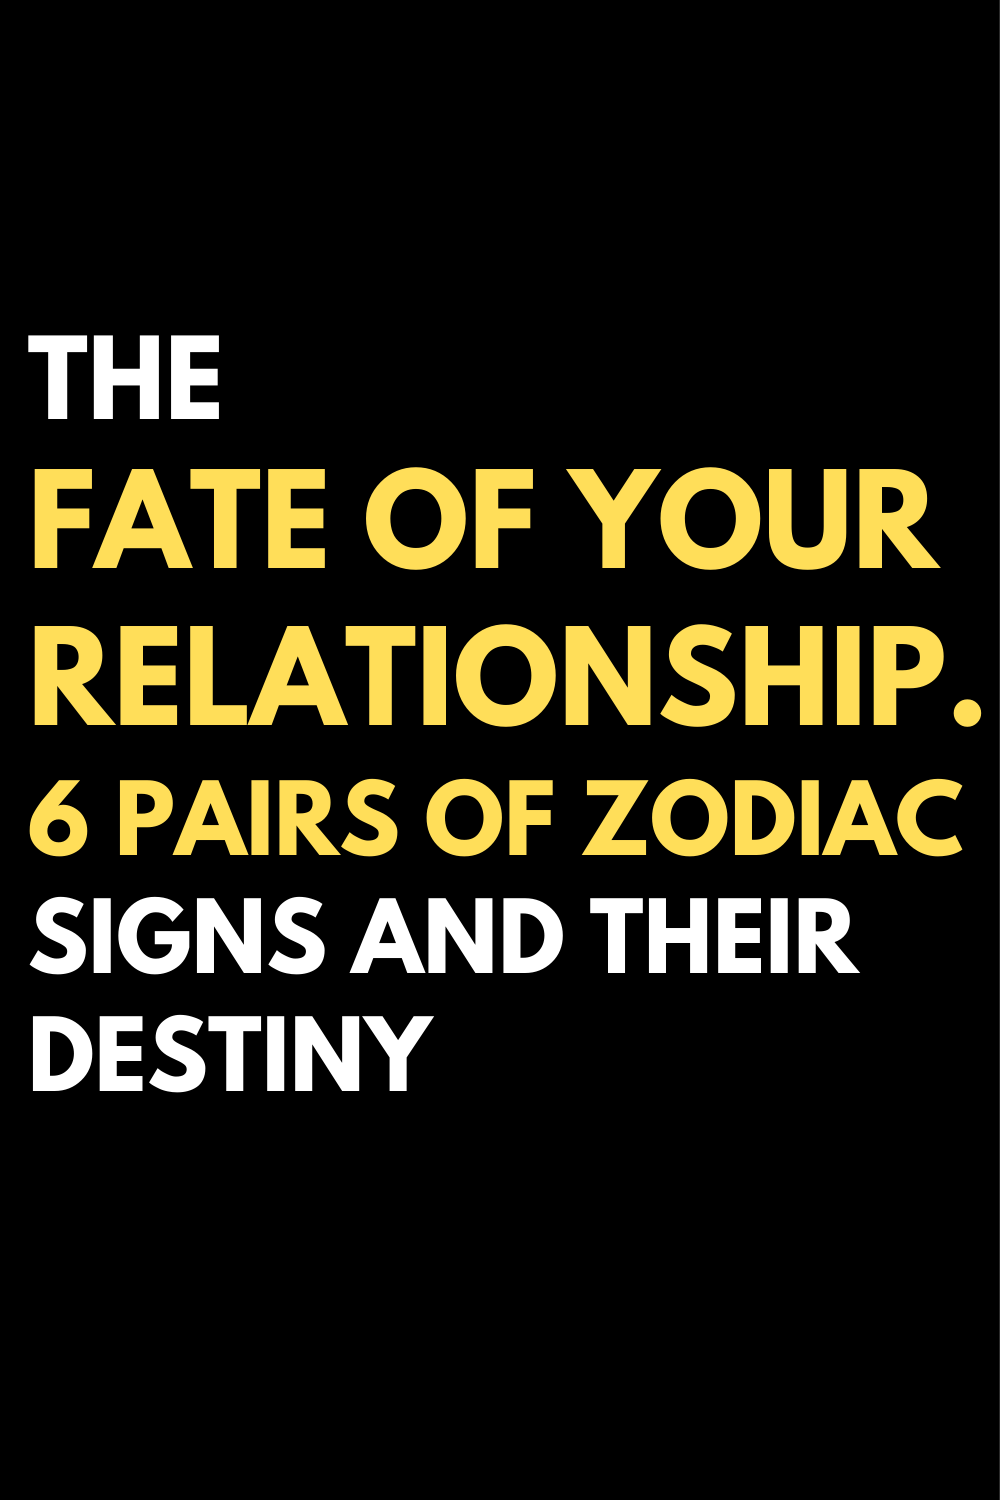 The fate of your relationship. 6 pairs of zodiac signs and their destiny